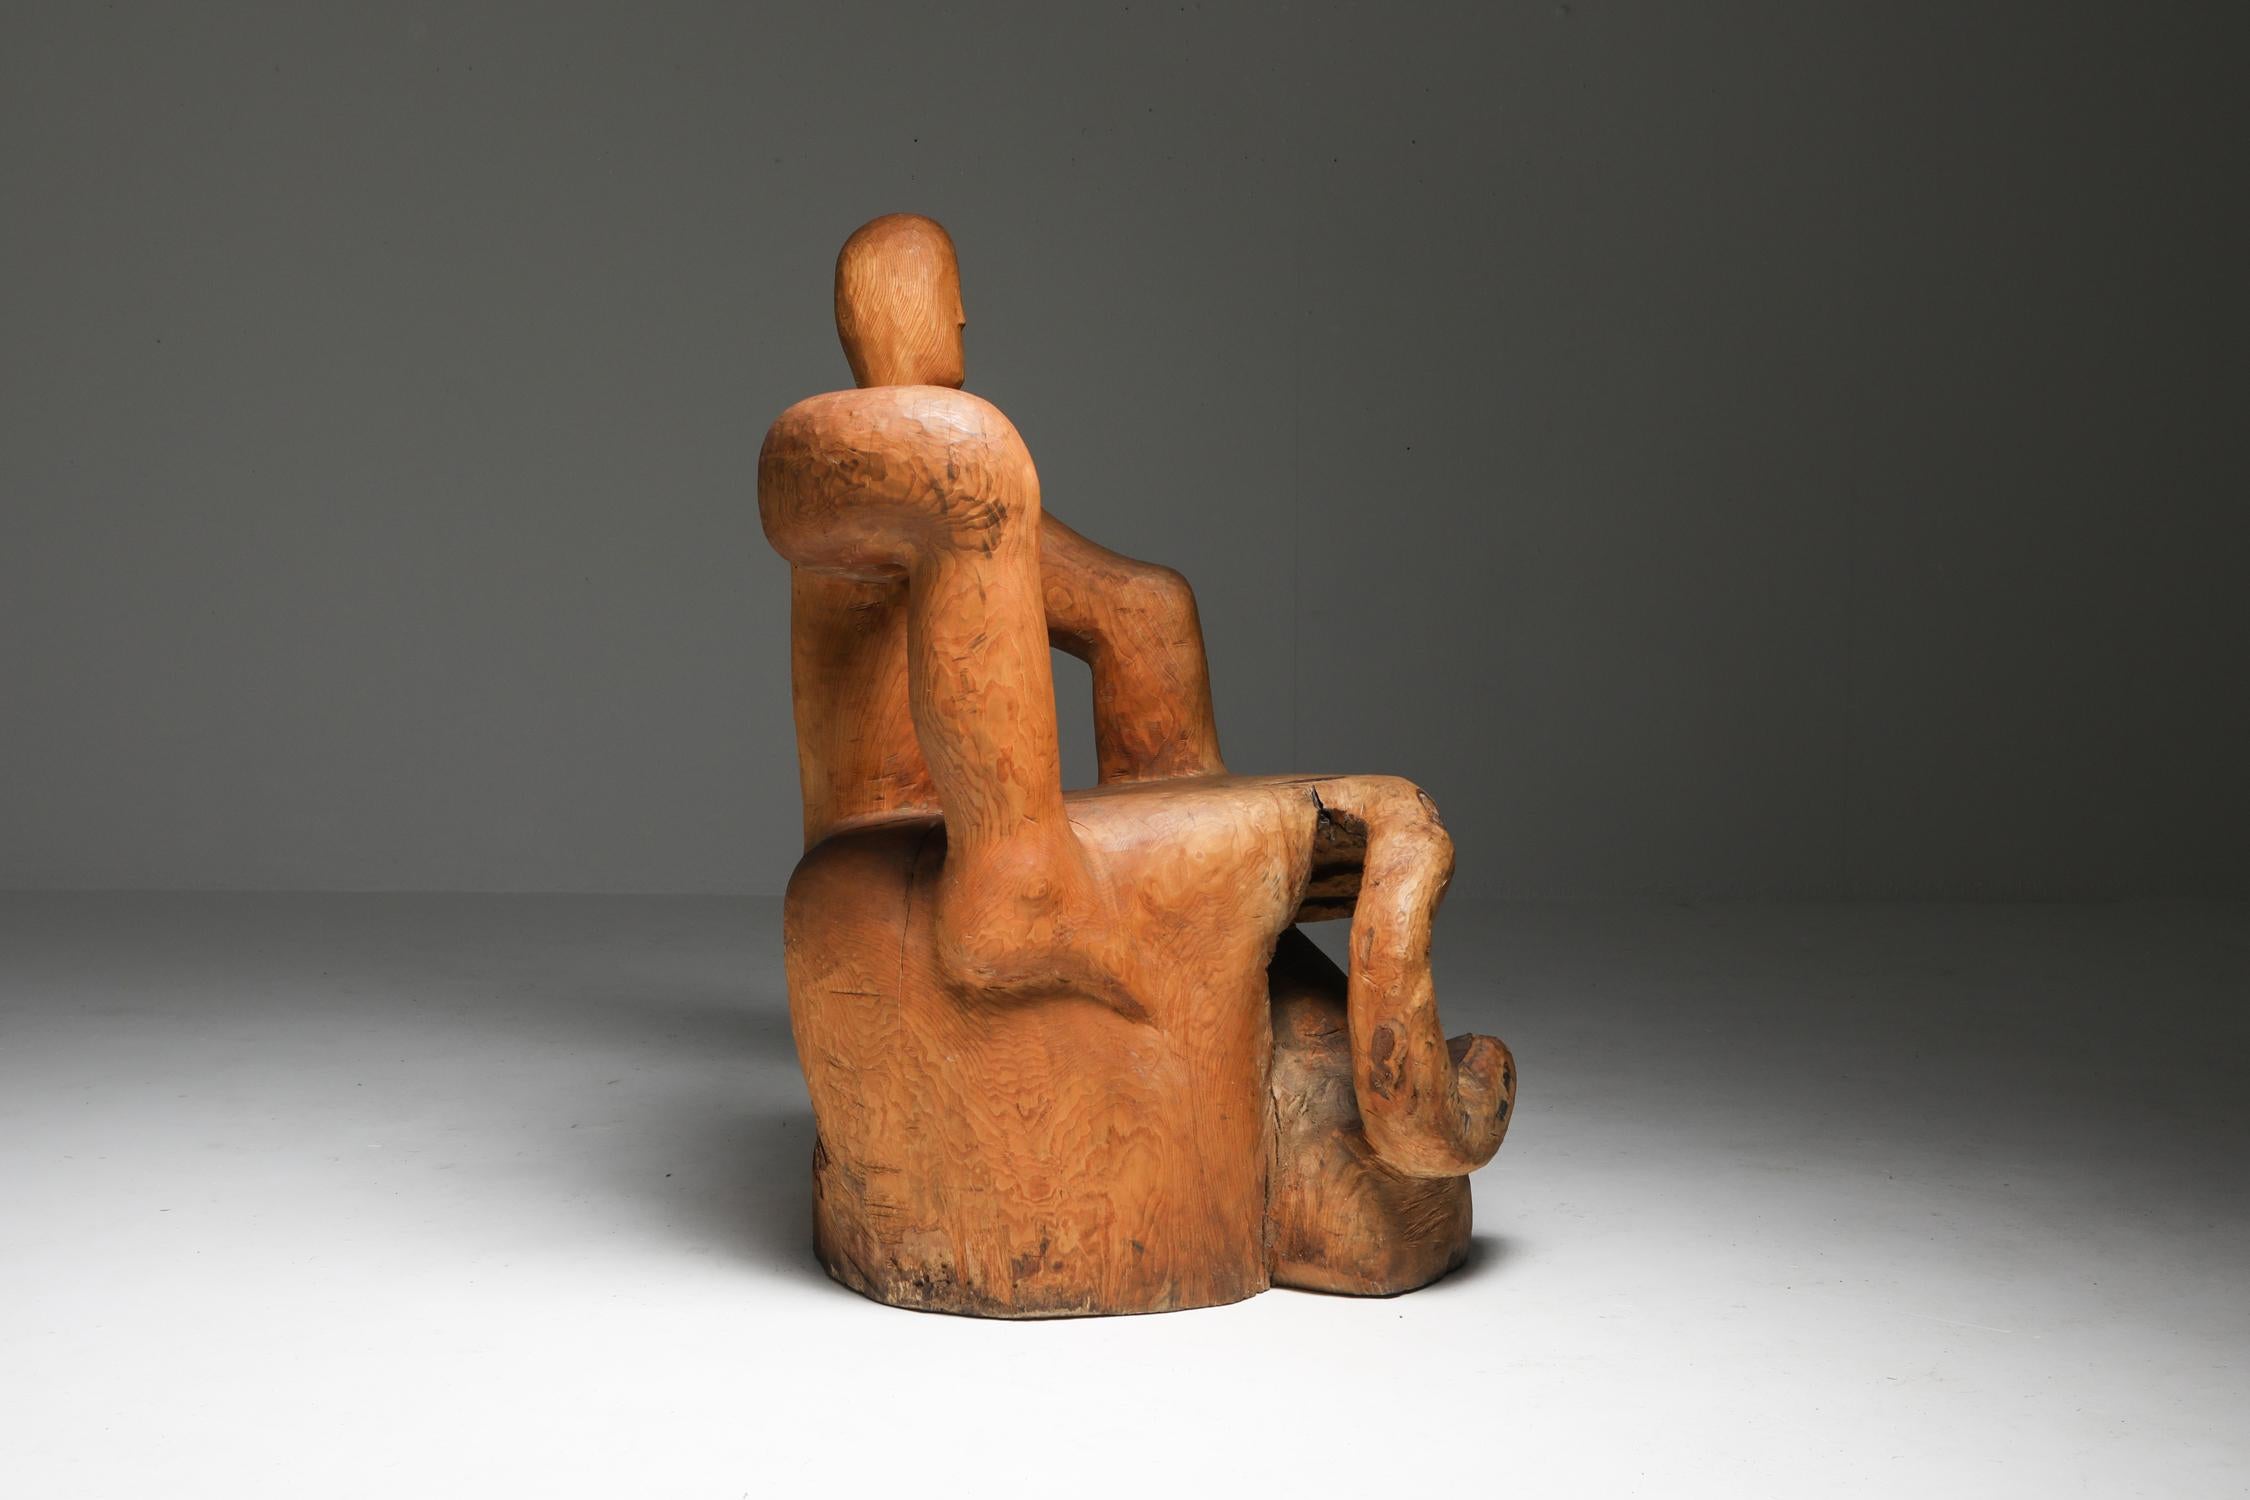 Unusual piece, more a sculpture than a chair, made from one huge log of pine.

Rodin meets Oskar Schlemmer meets Axel Einar Hjorth

Fits as well in a rustic modern wabi sabi decor as in a more eclectic art house.